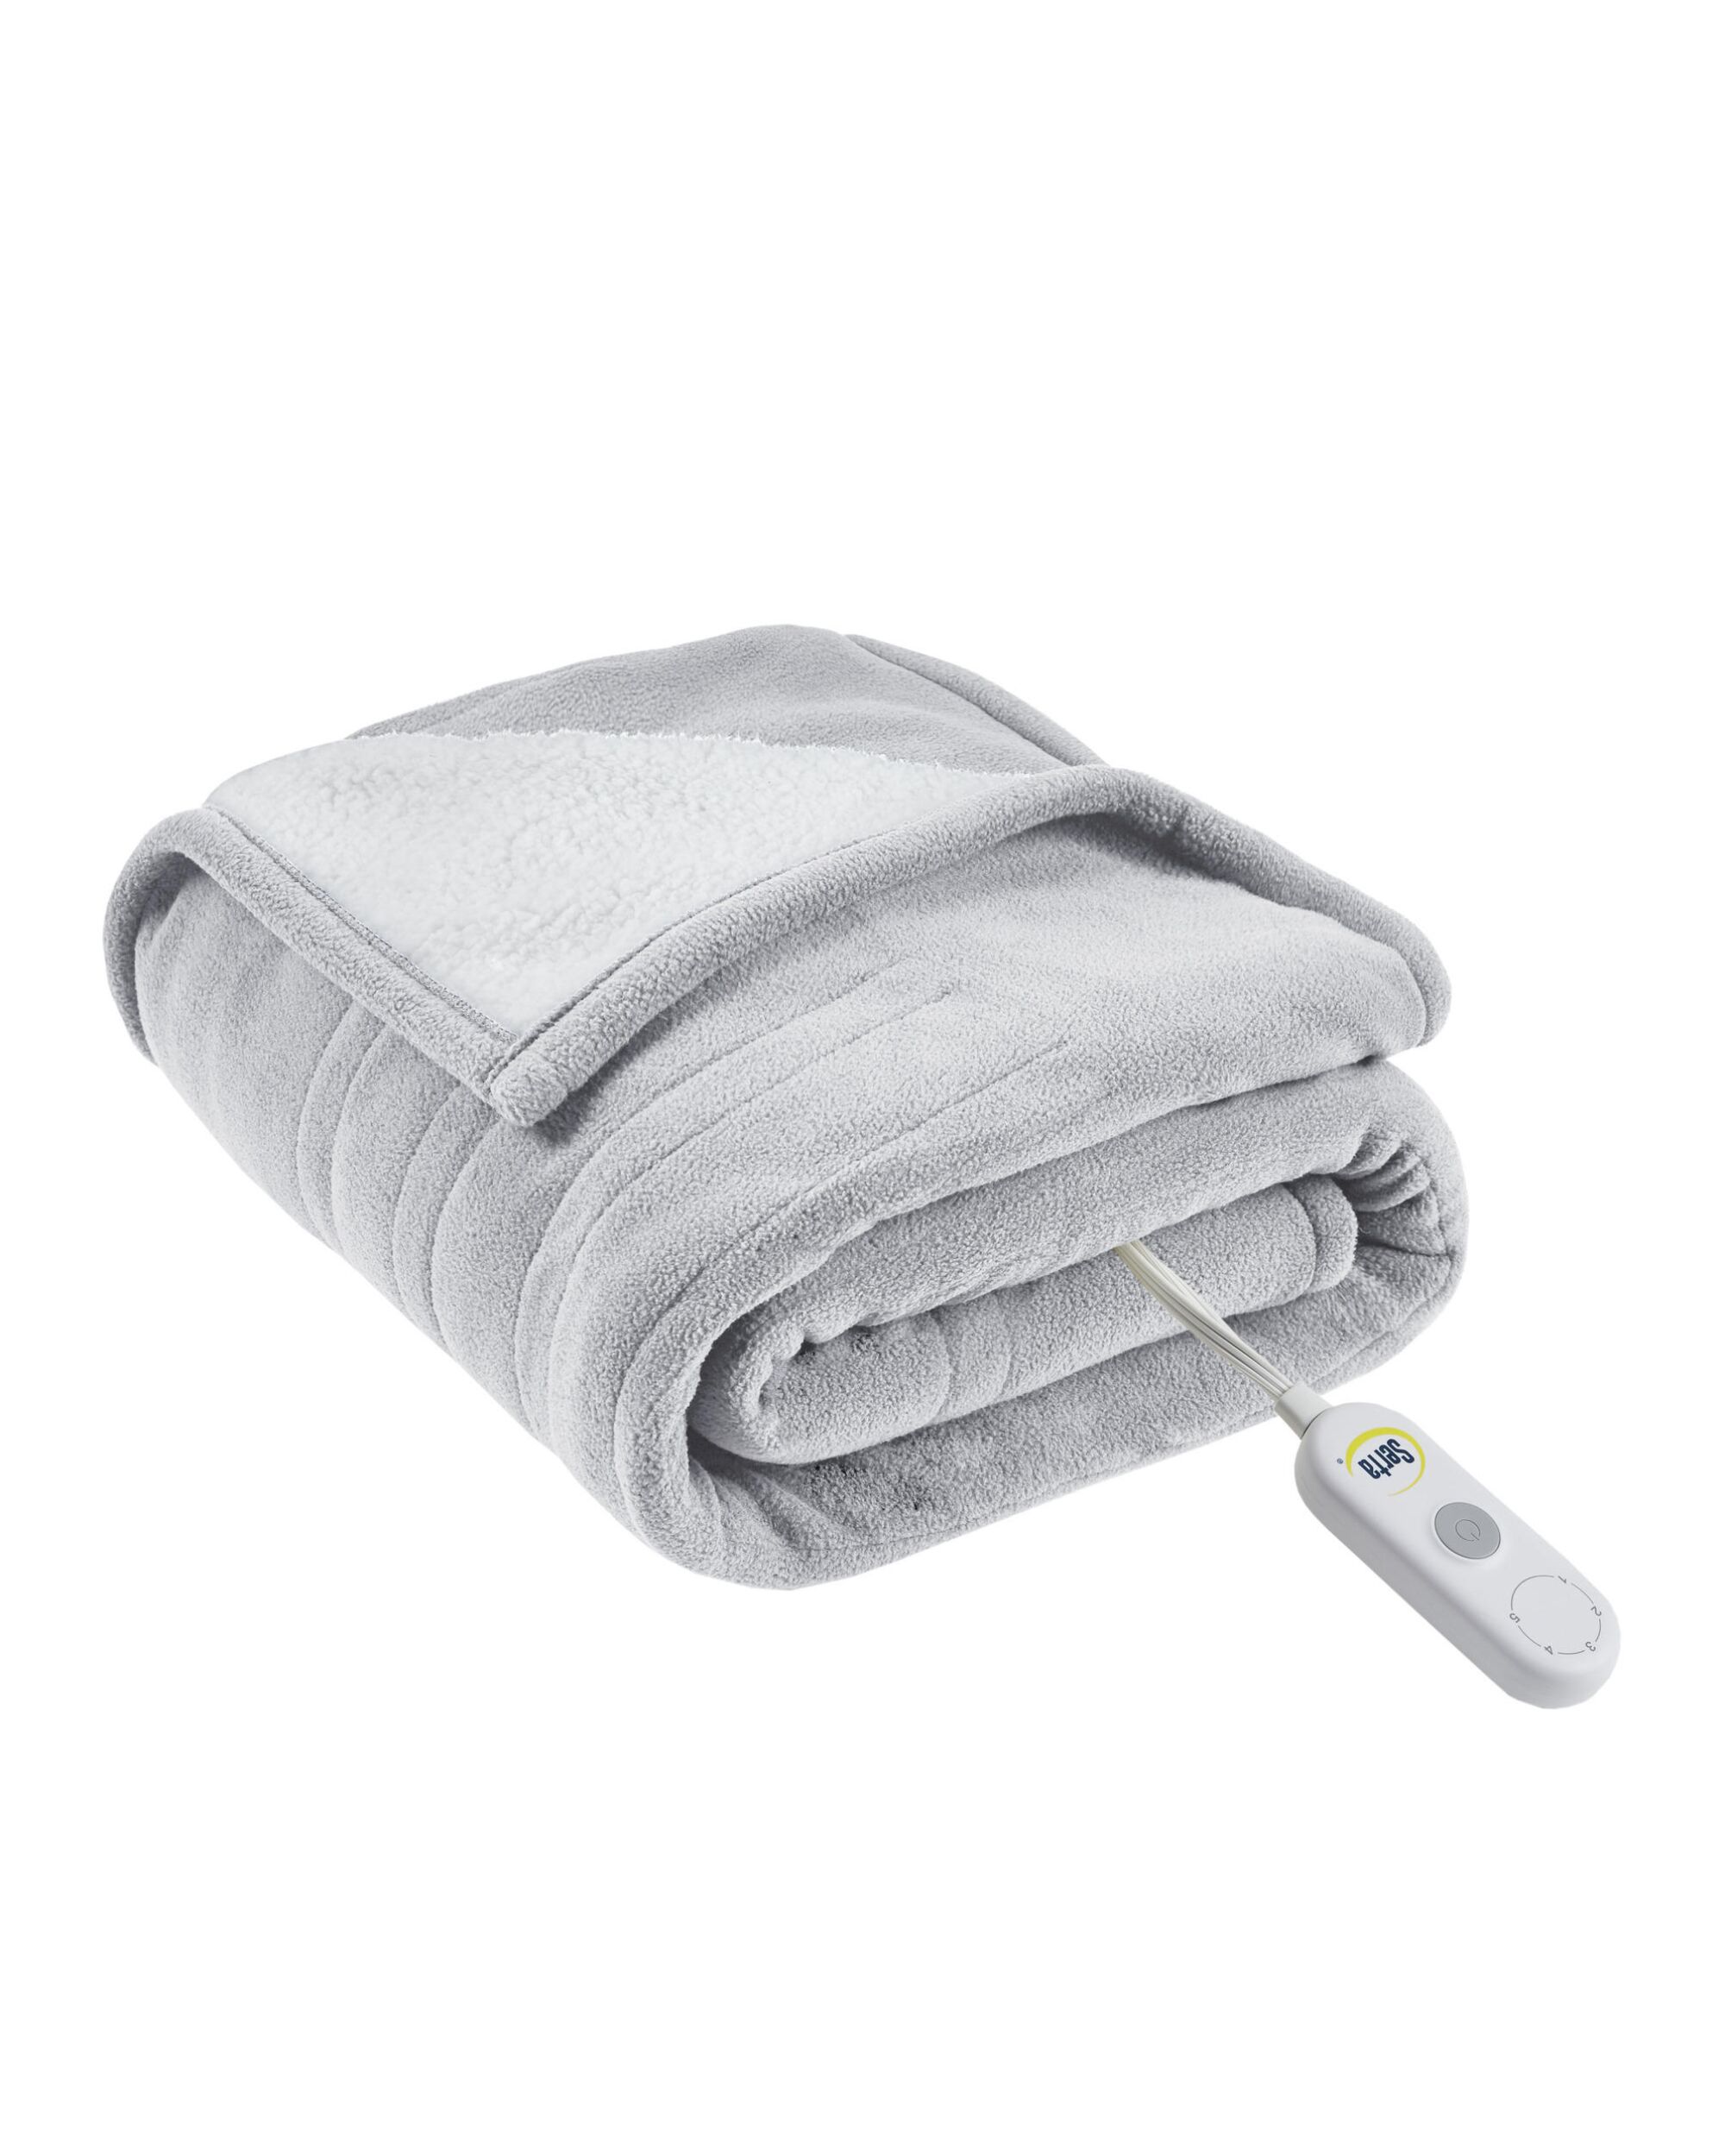 A heated throw blanket from Serta 